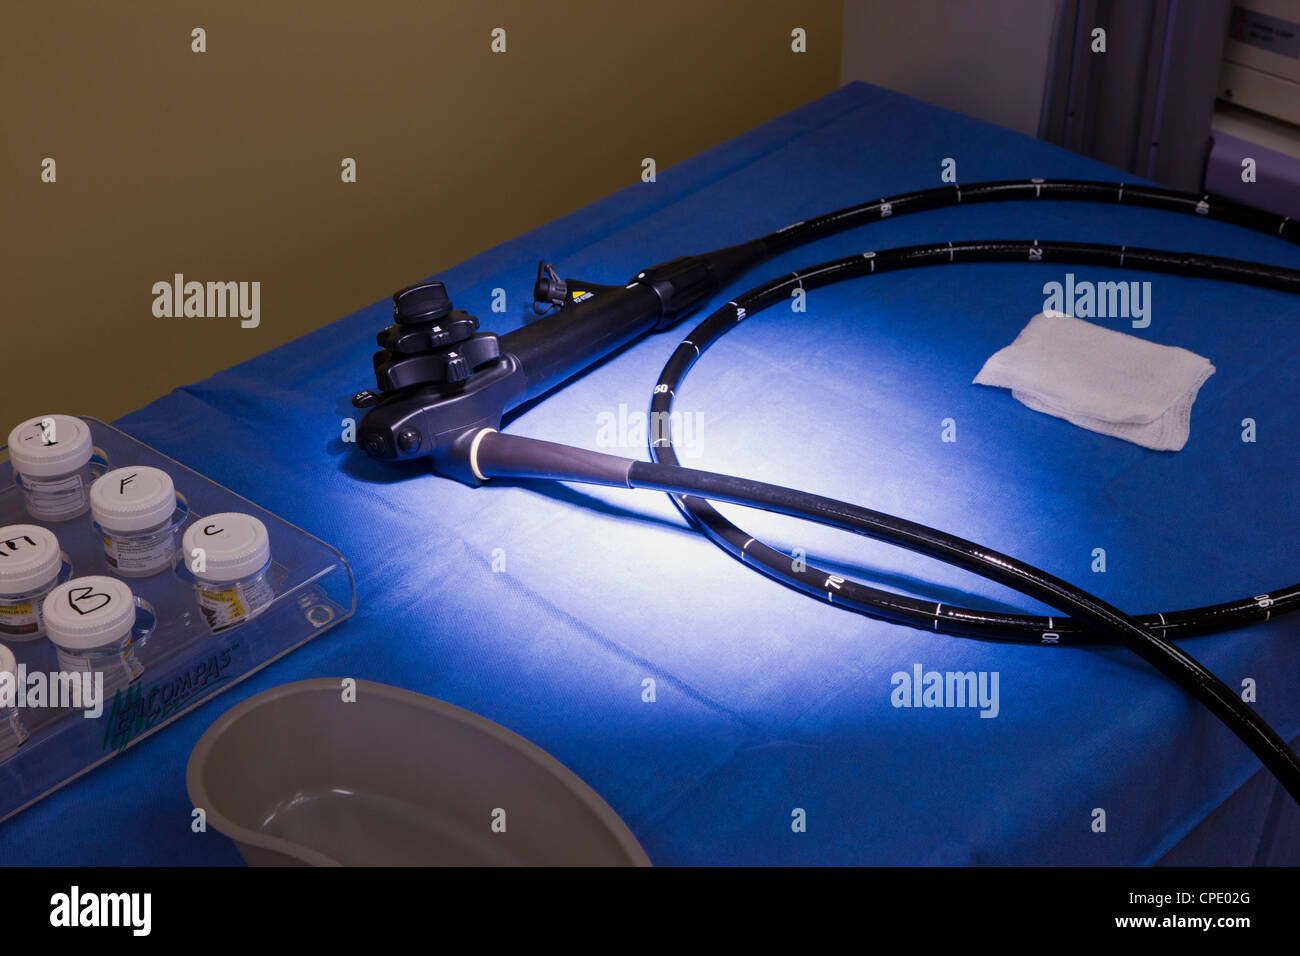 Surgical suite in hospital prepared for endoscopy and colonoscopy procedures. Stock Photo